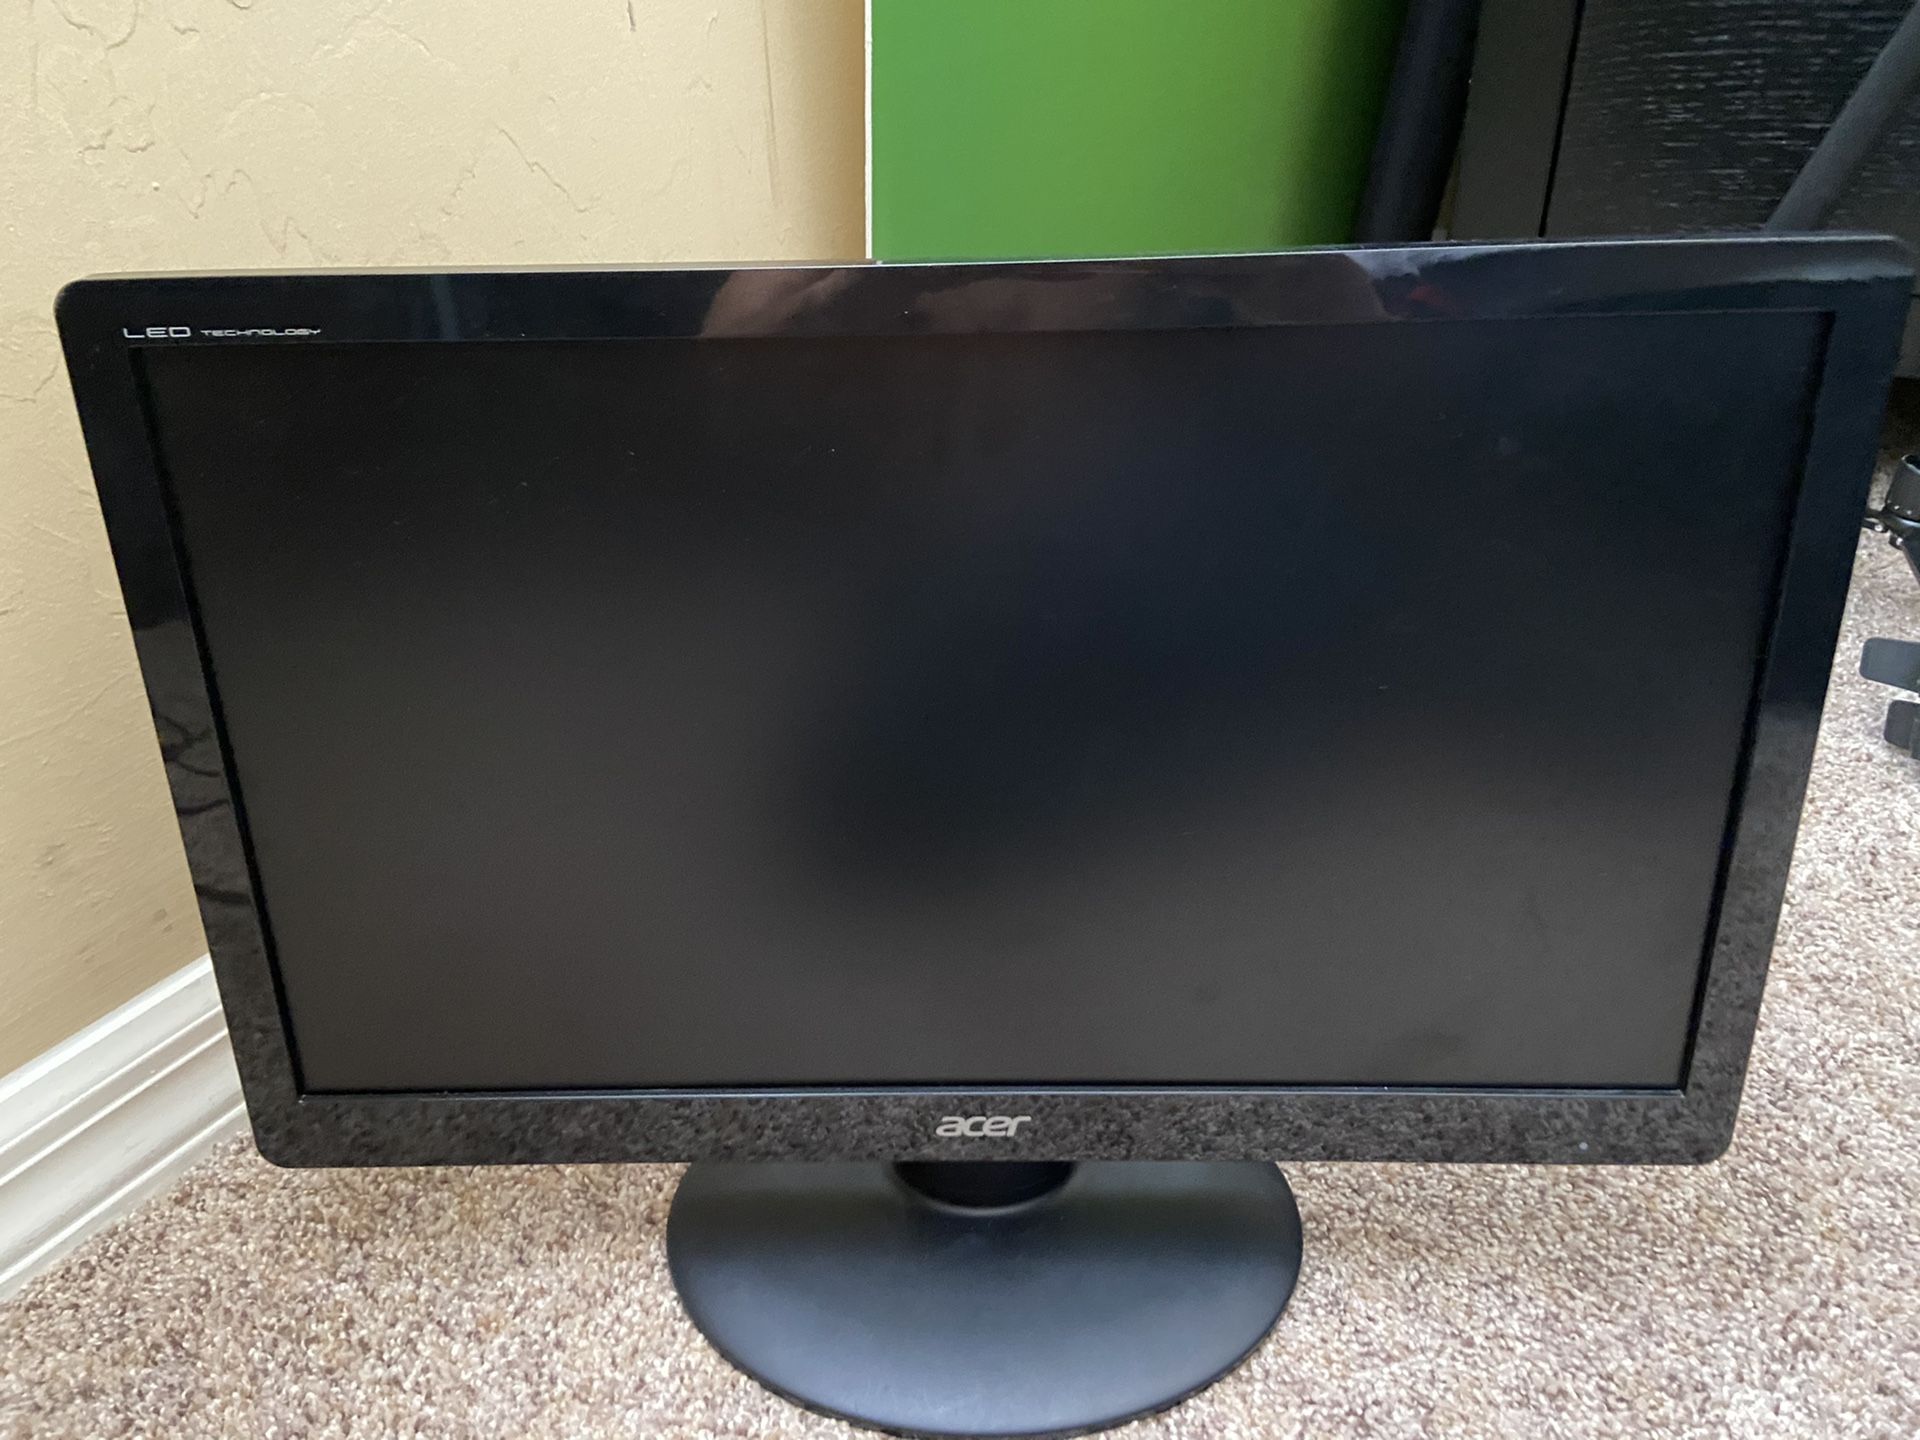 Acer Monitor 18.5’ Comes with power cord, HDMI adapter, and it’s in great condition!